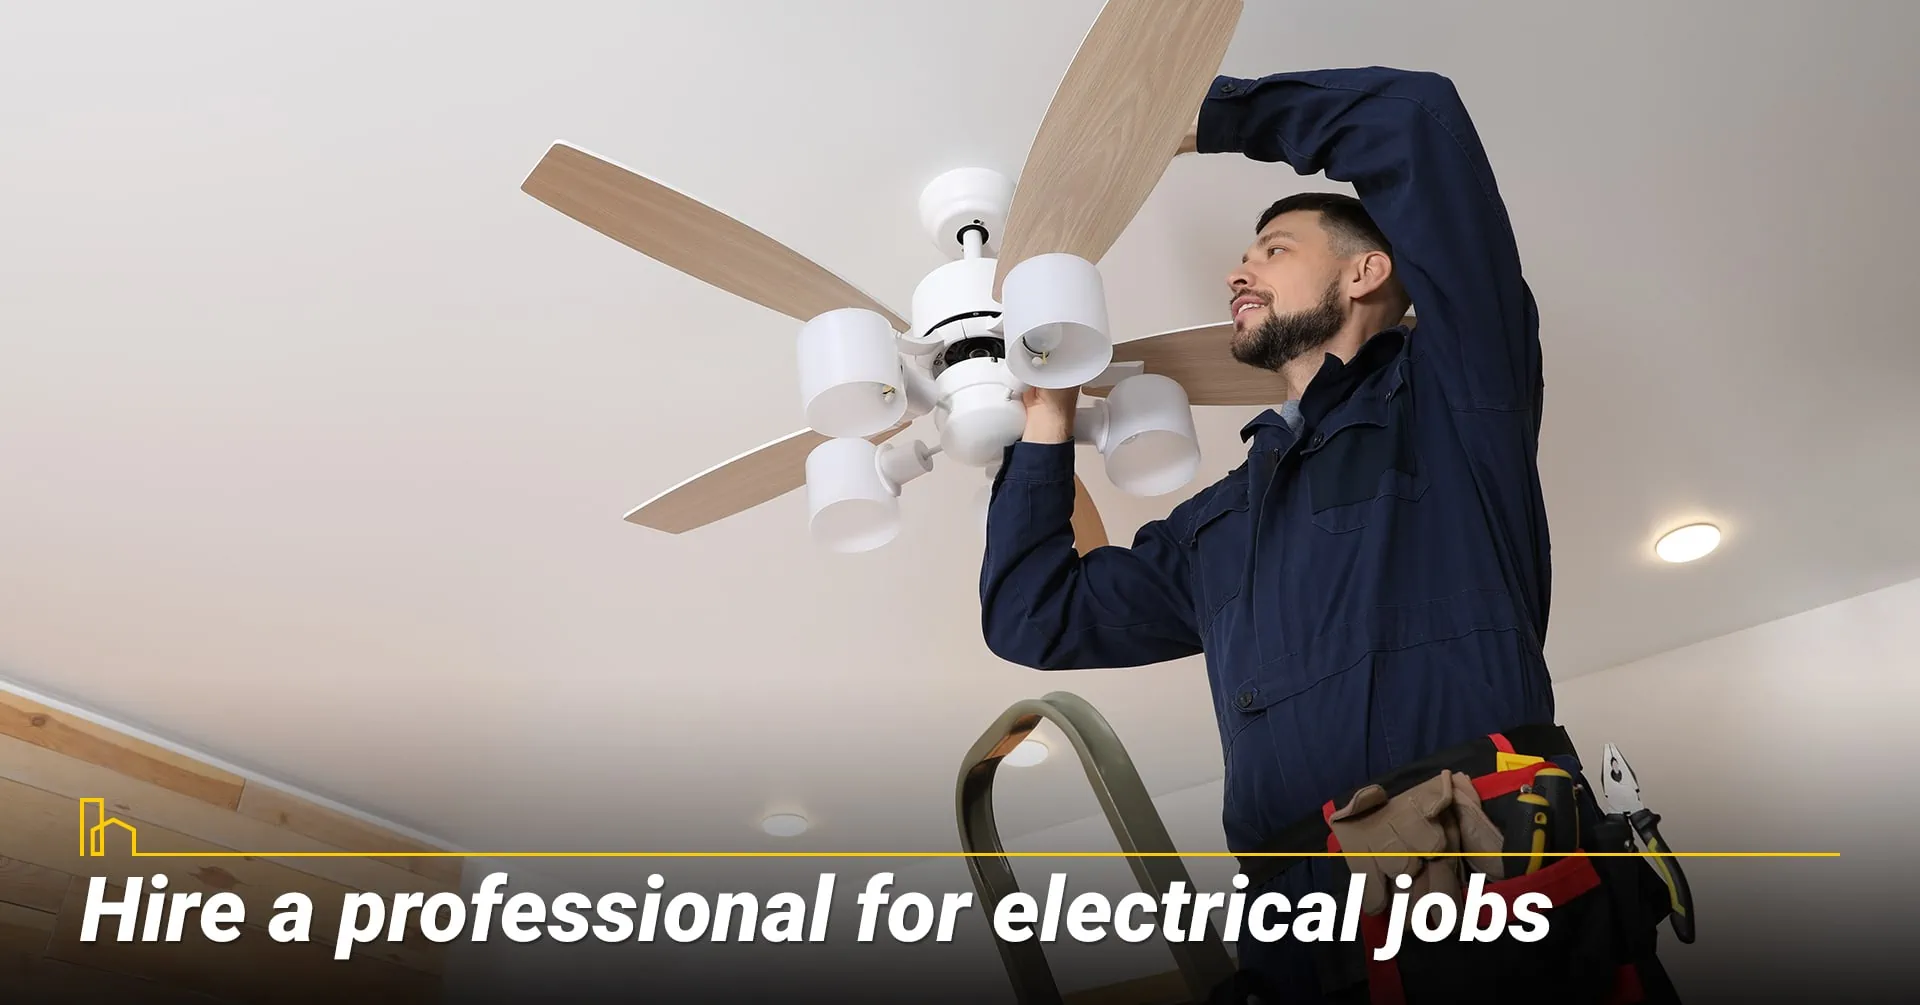 Hire a professional for electrical jobs.